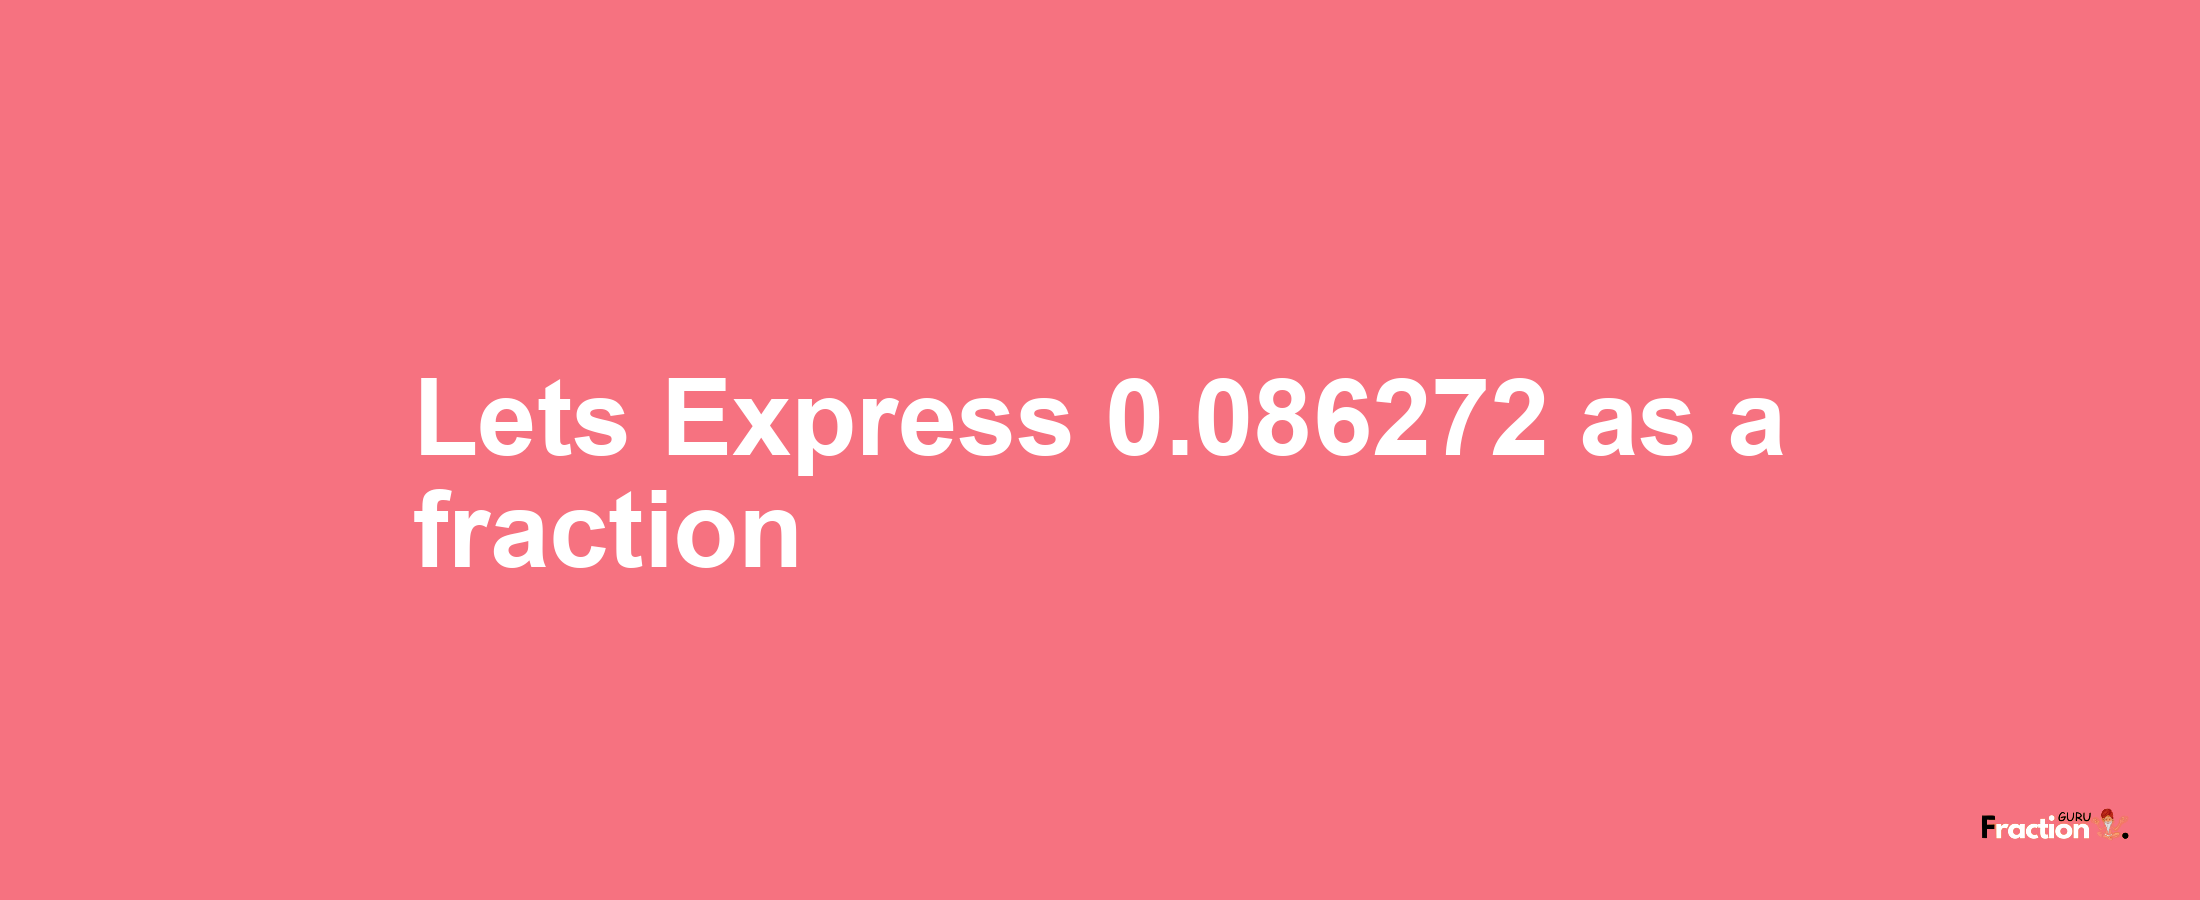 Lets Express 0.086272 as afraction